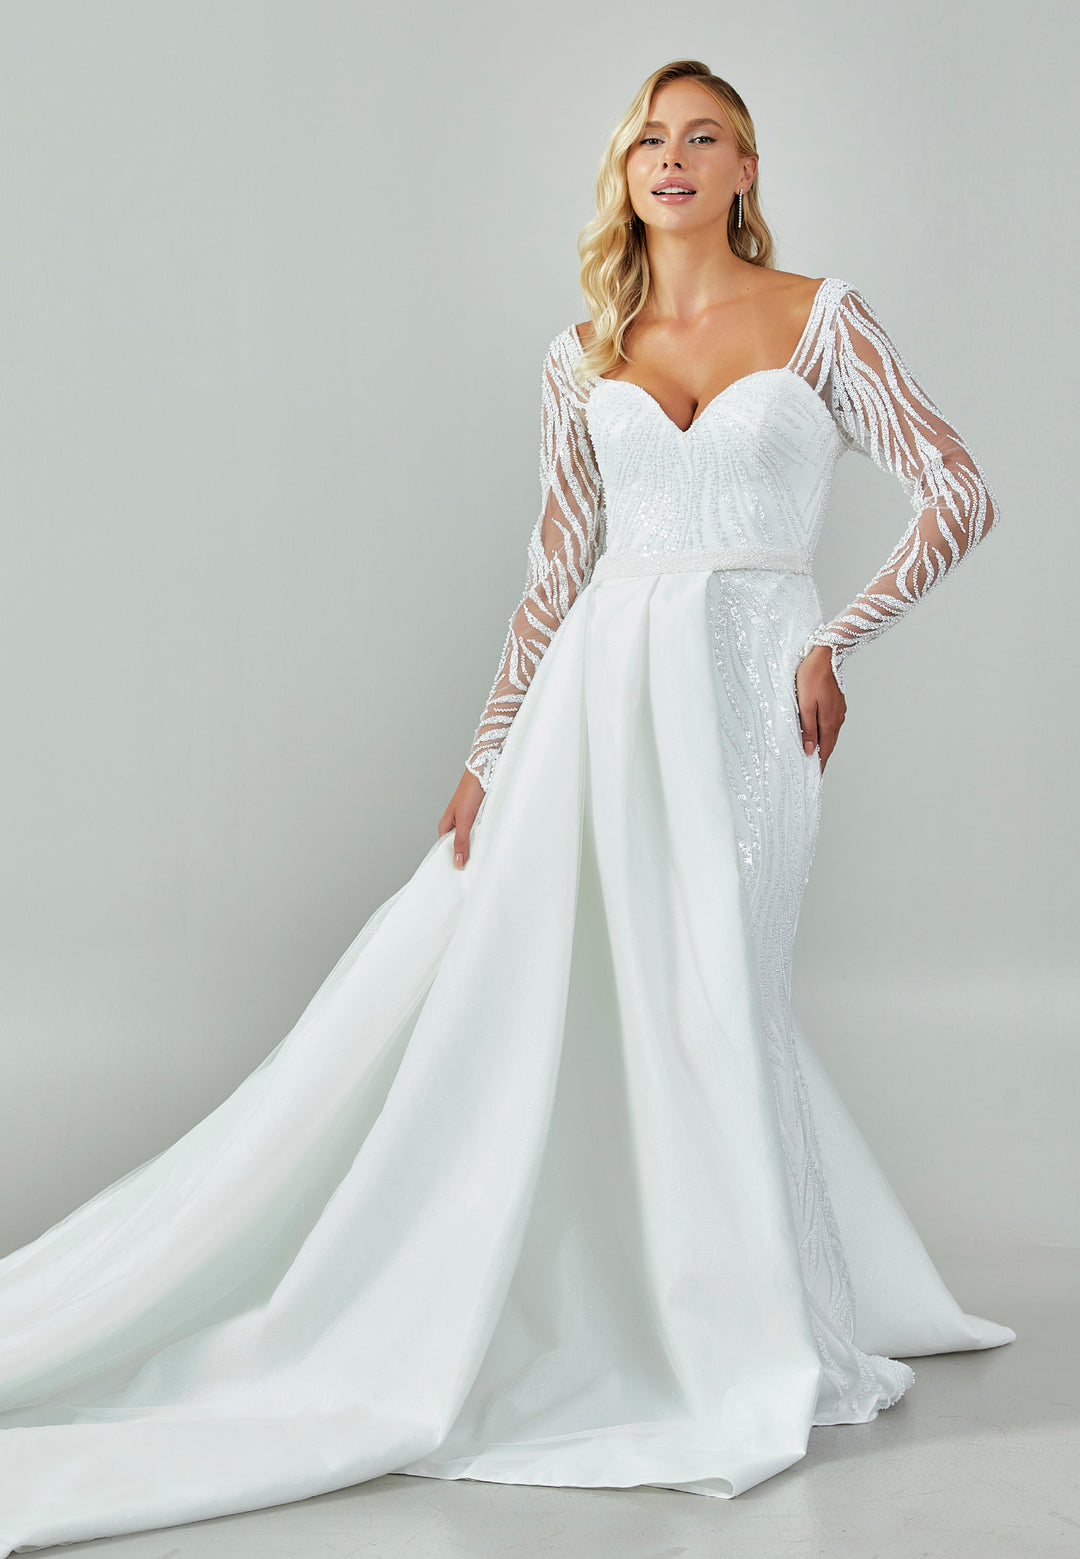 Top Bridal Fashion Trends for the Upcoming Season